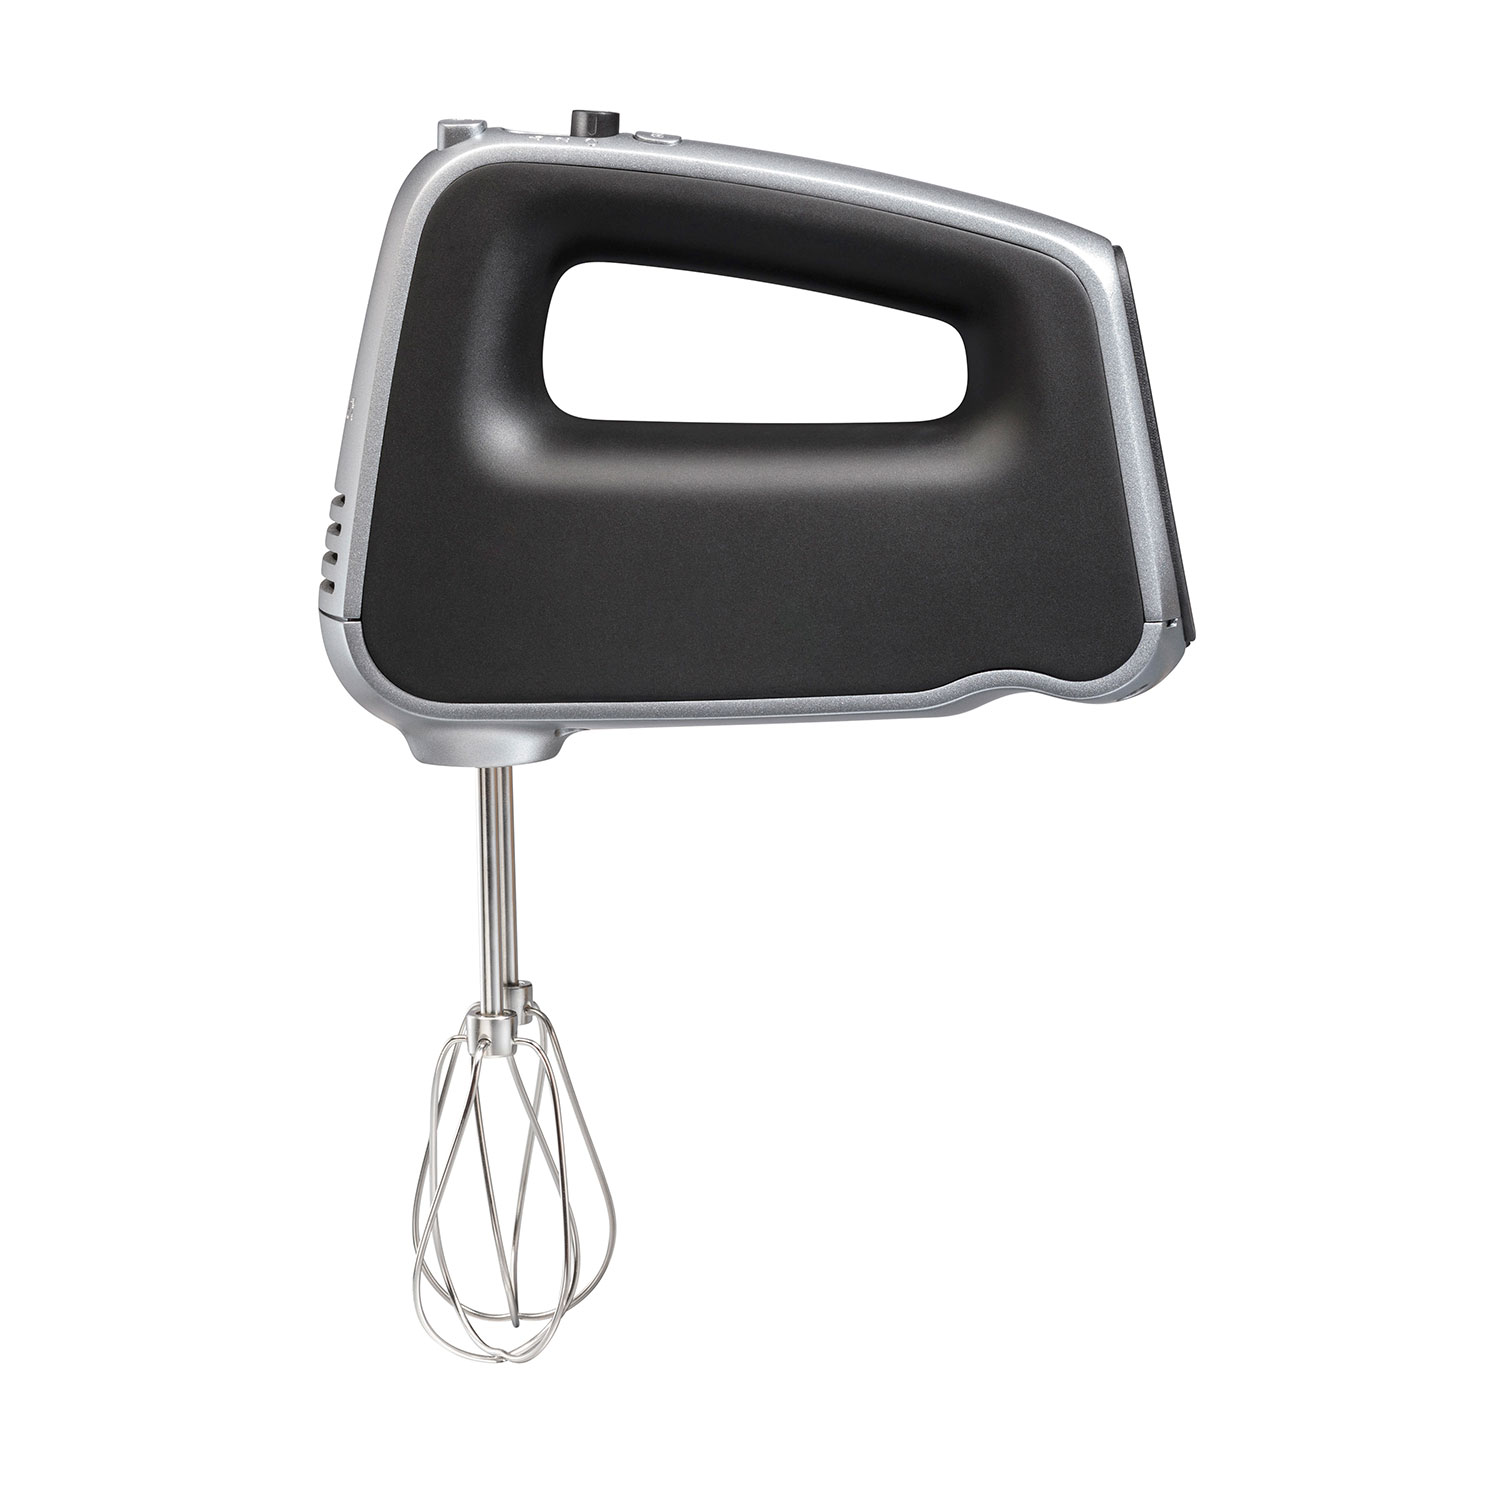 5 Speeds Plus Boost Hand Mixer - 62501 Small Size